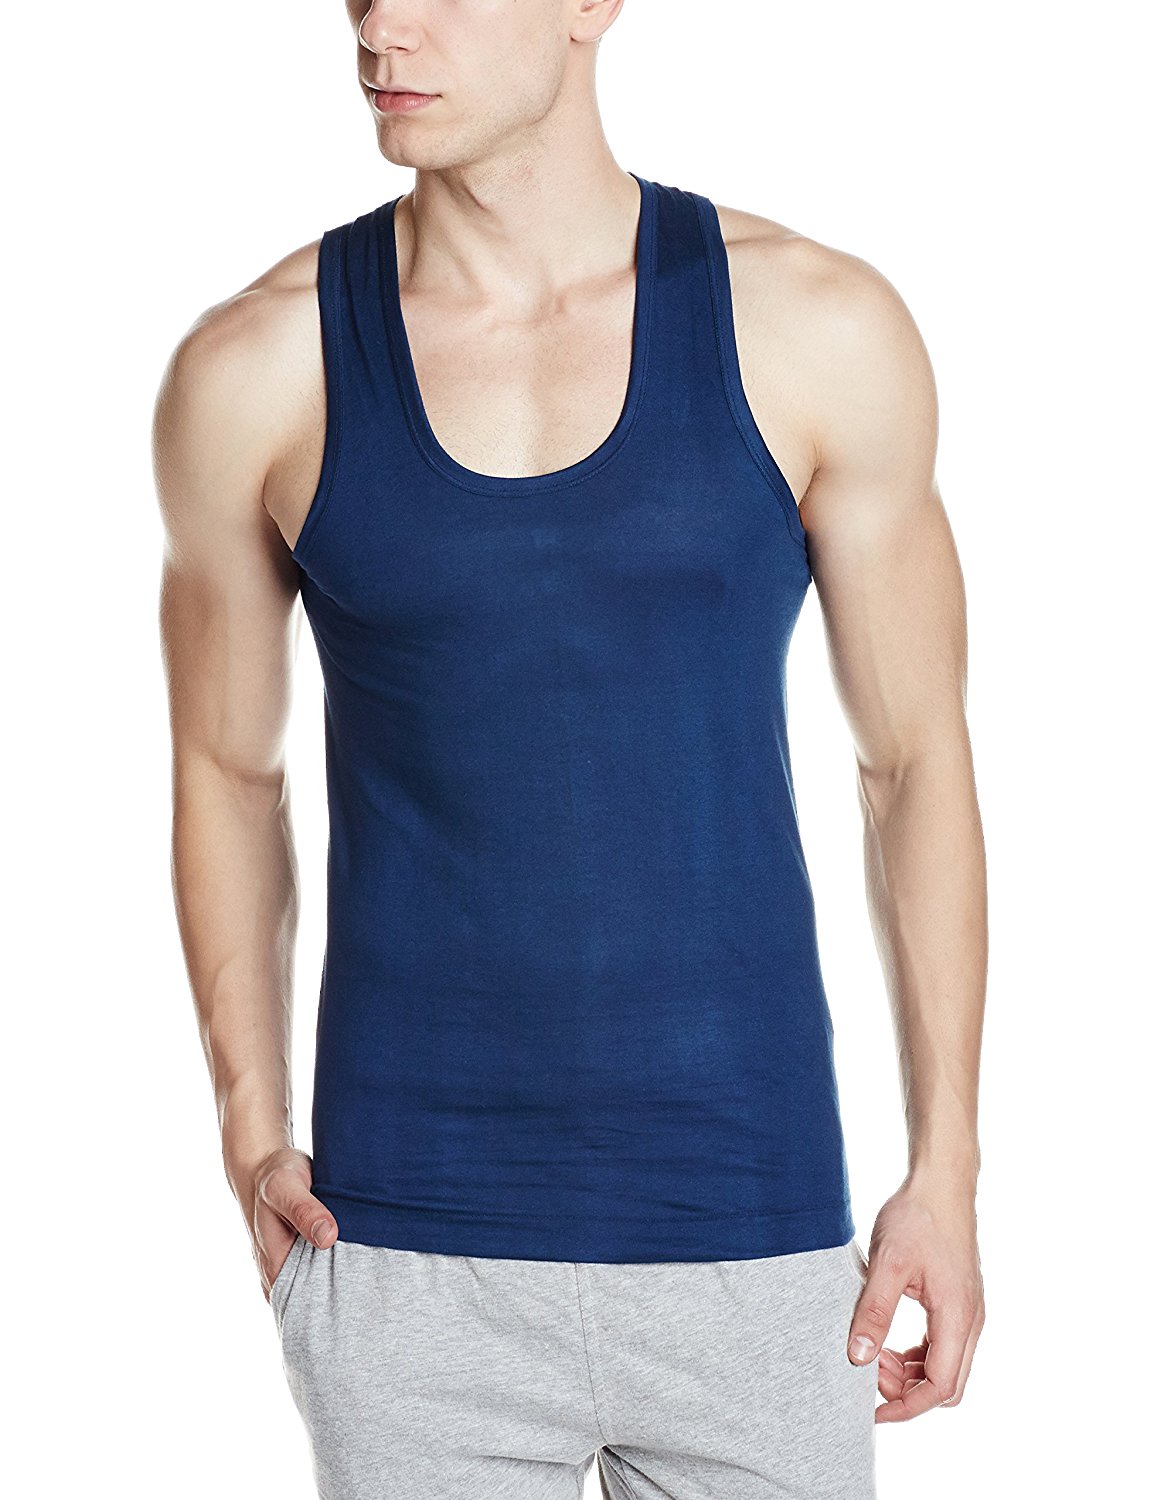 Buy RUPA JON Men's Colour Cotton Vest (Pack of 10) (Colors May Vary ...